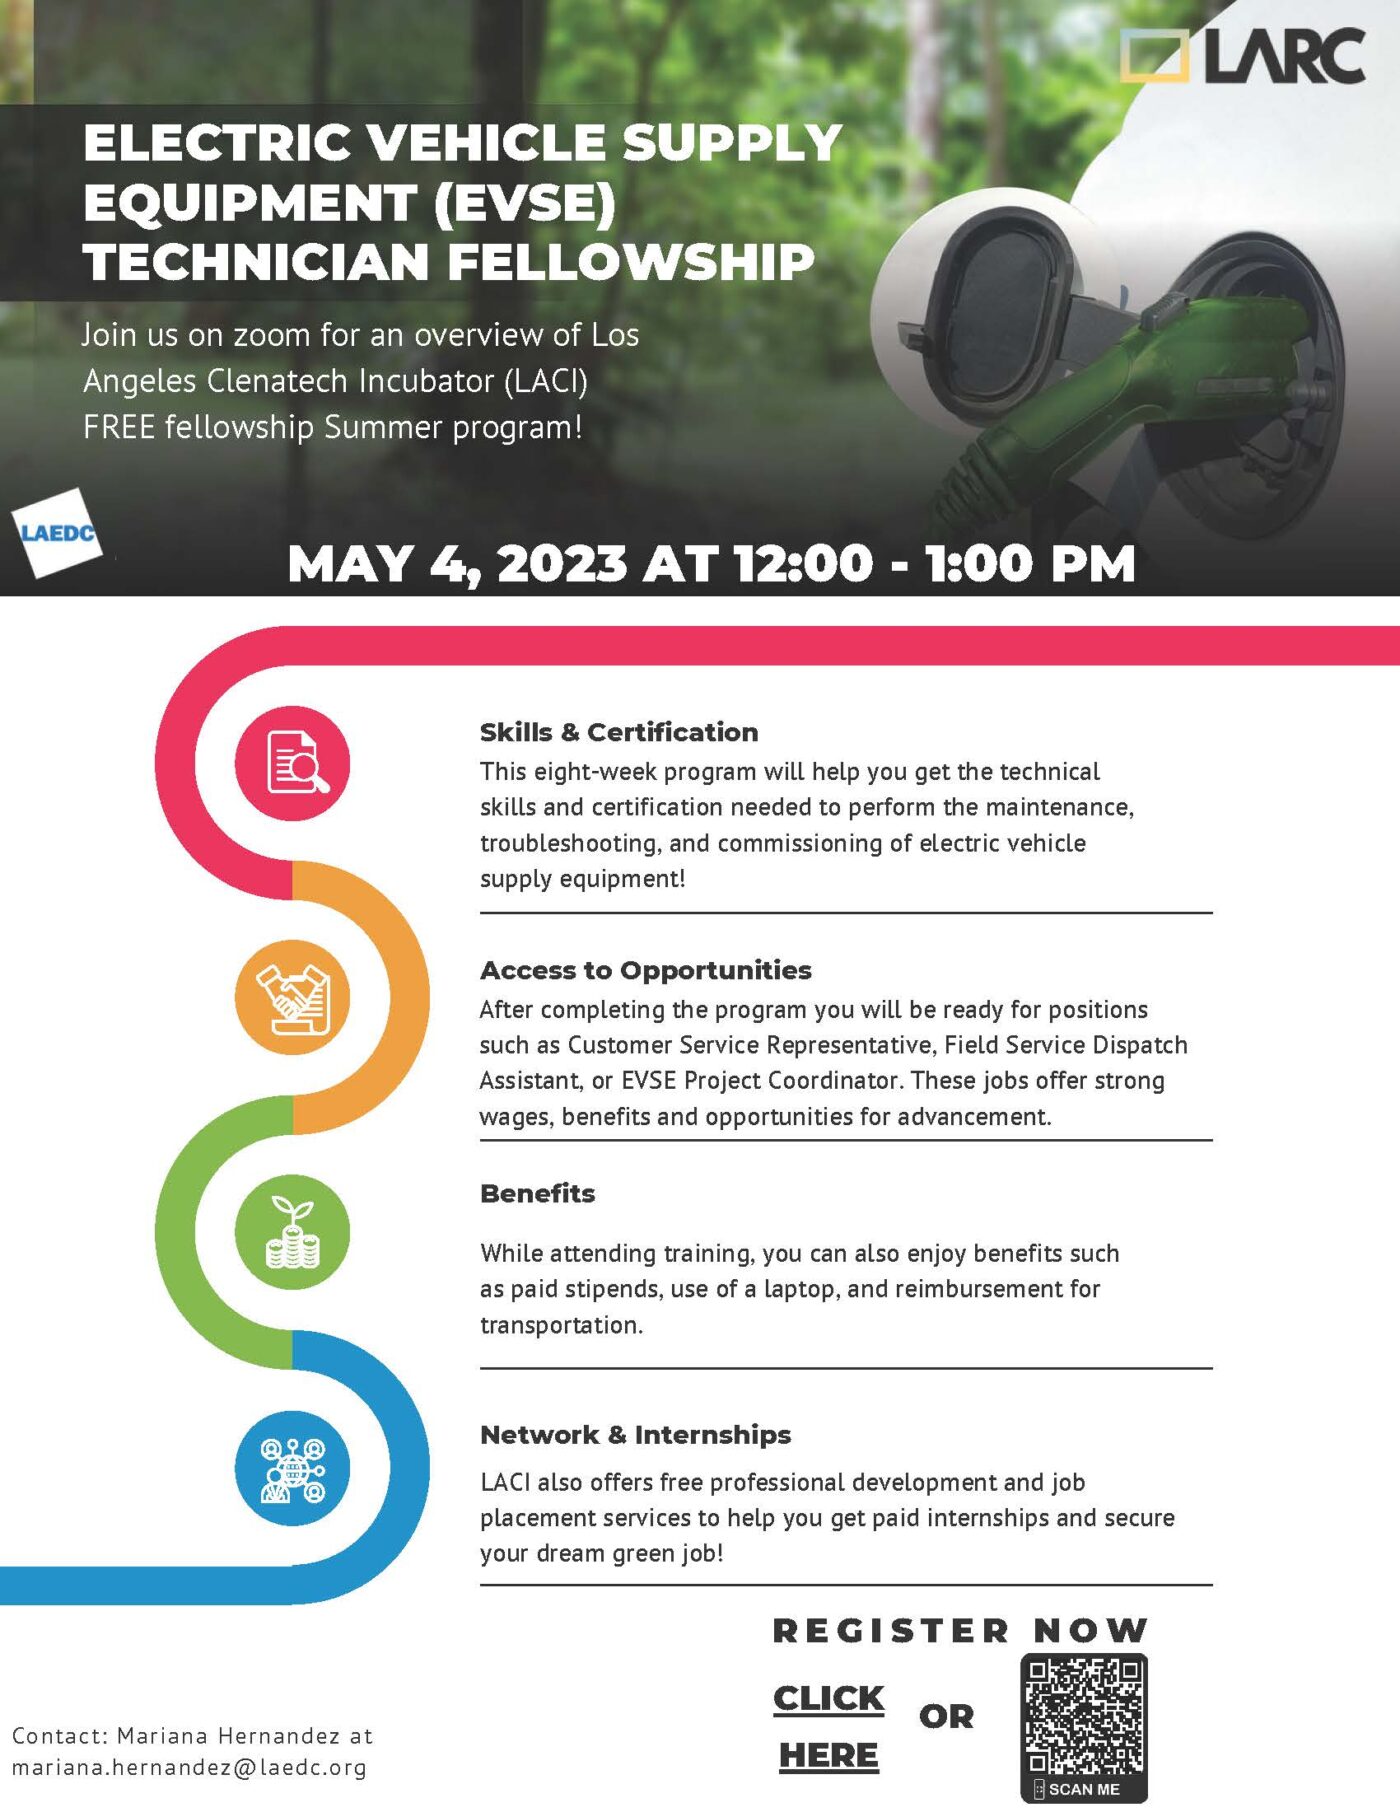 electric-vehicle-supply-equipment-evse-technician-fellowship-los